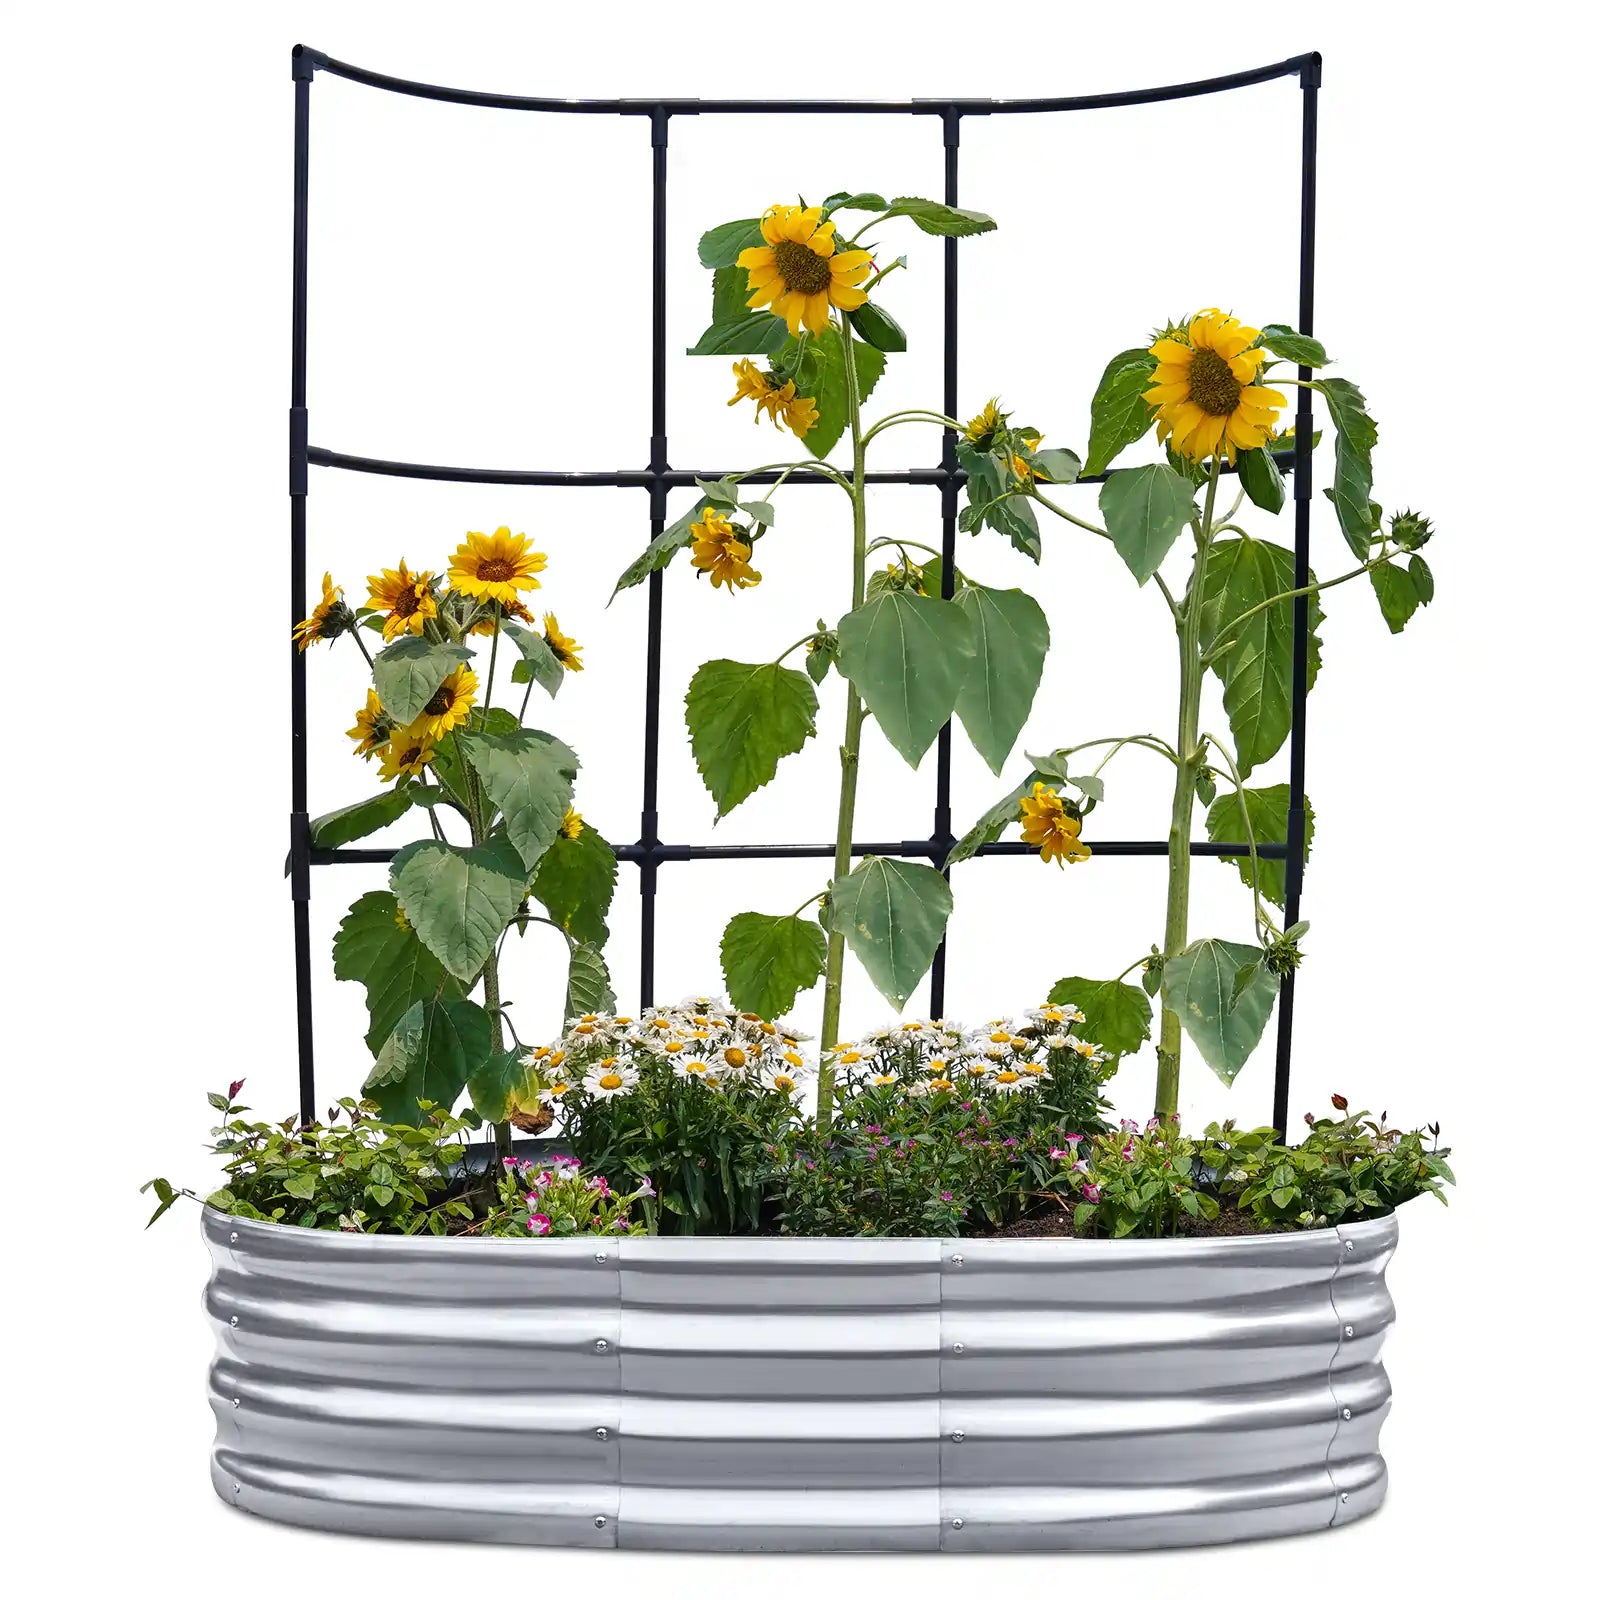 KING BIRD Raised Garden Bed with Wall Trellis 4x3x1ft#size_4x3x1ft